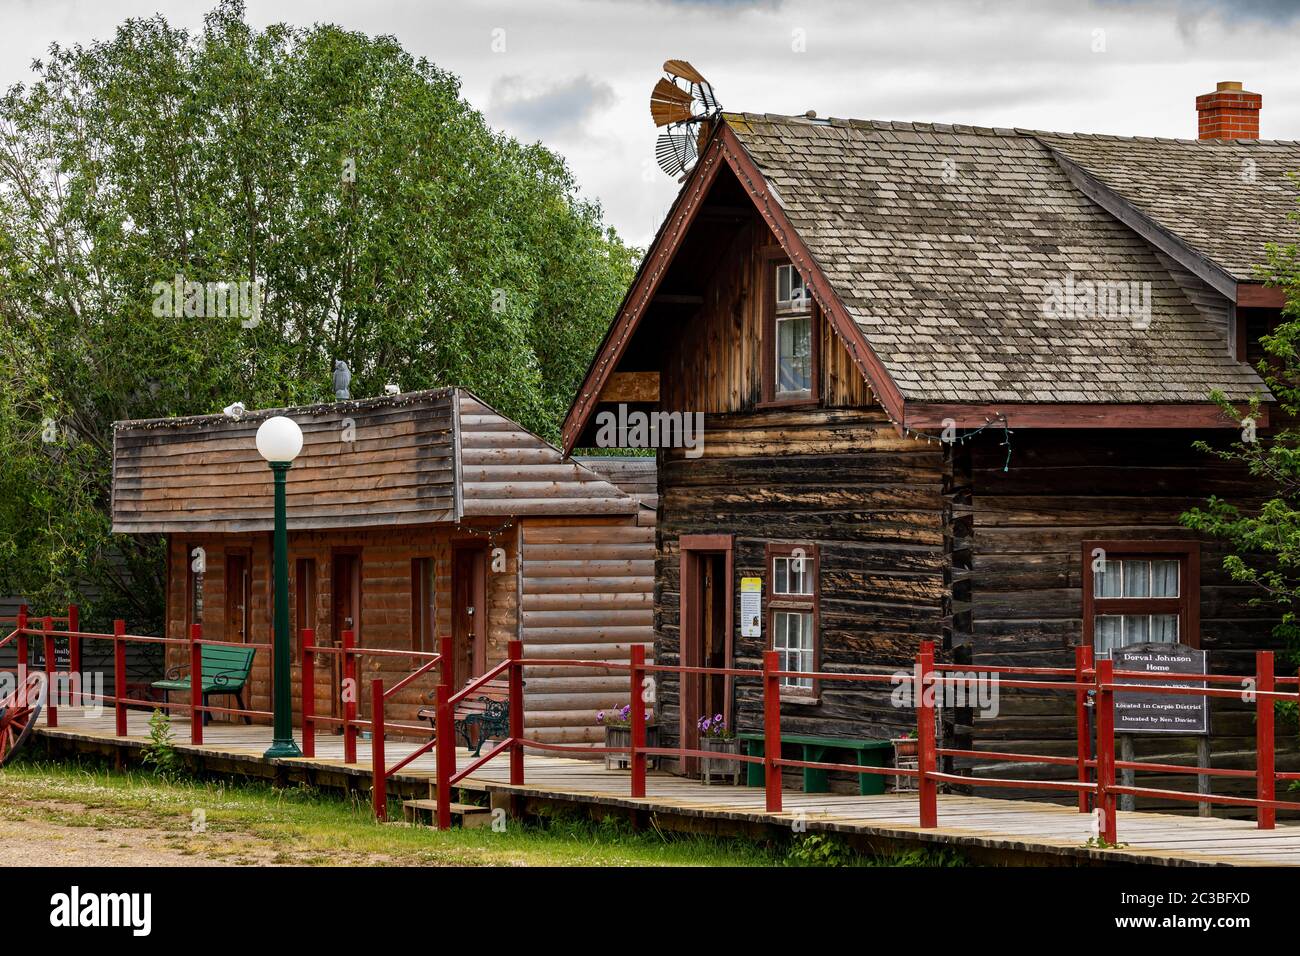 A Village of Wooden Houses in Canada Stock Photo - Alamy